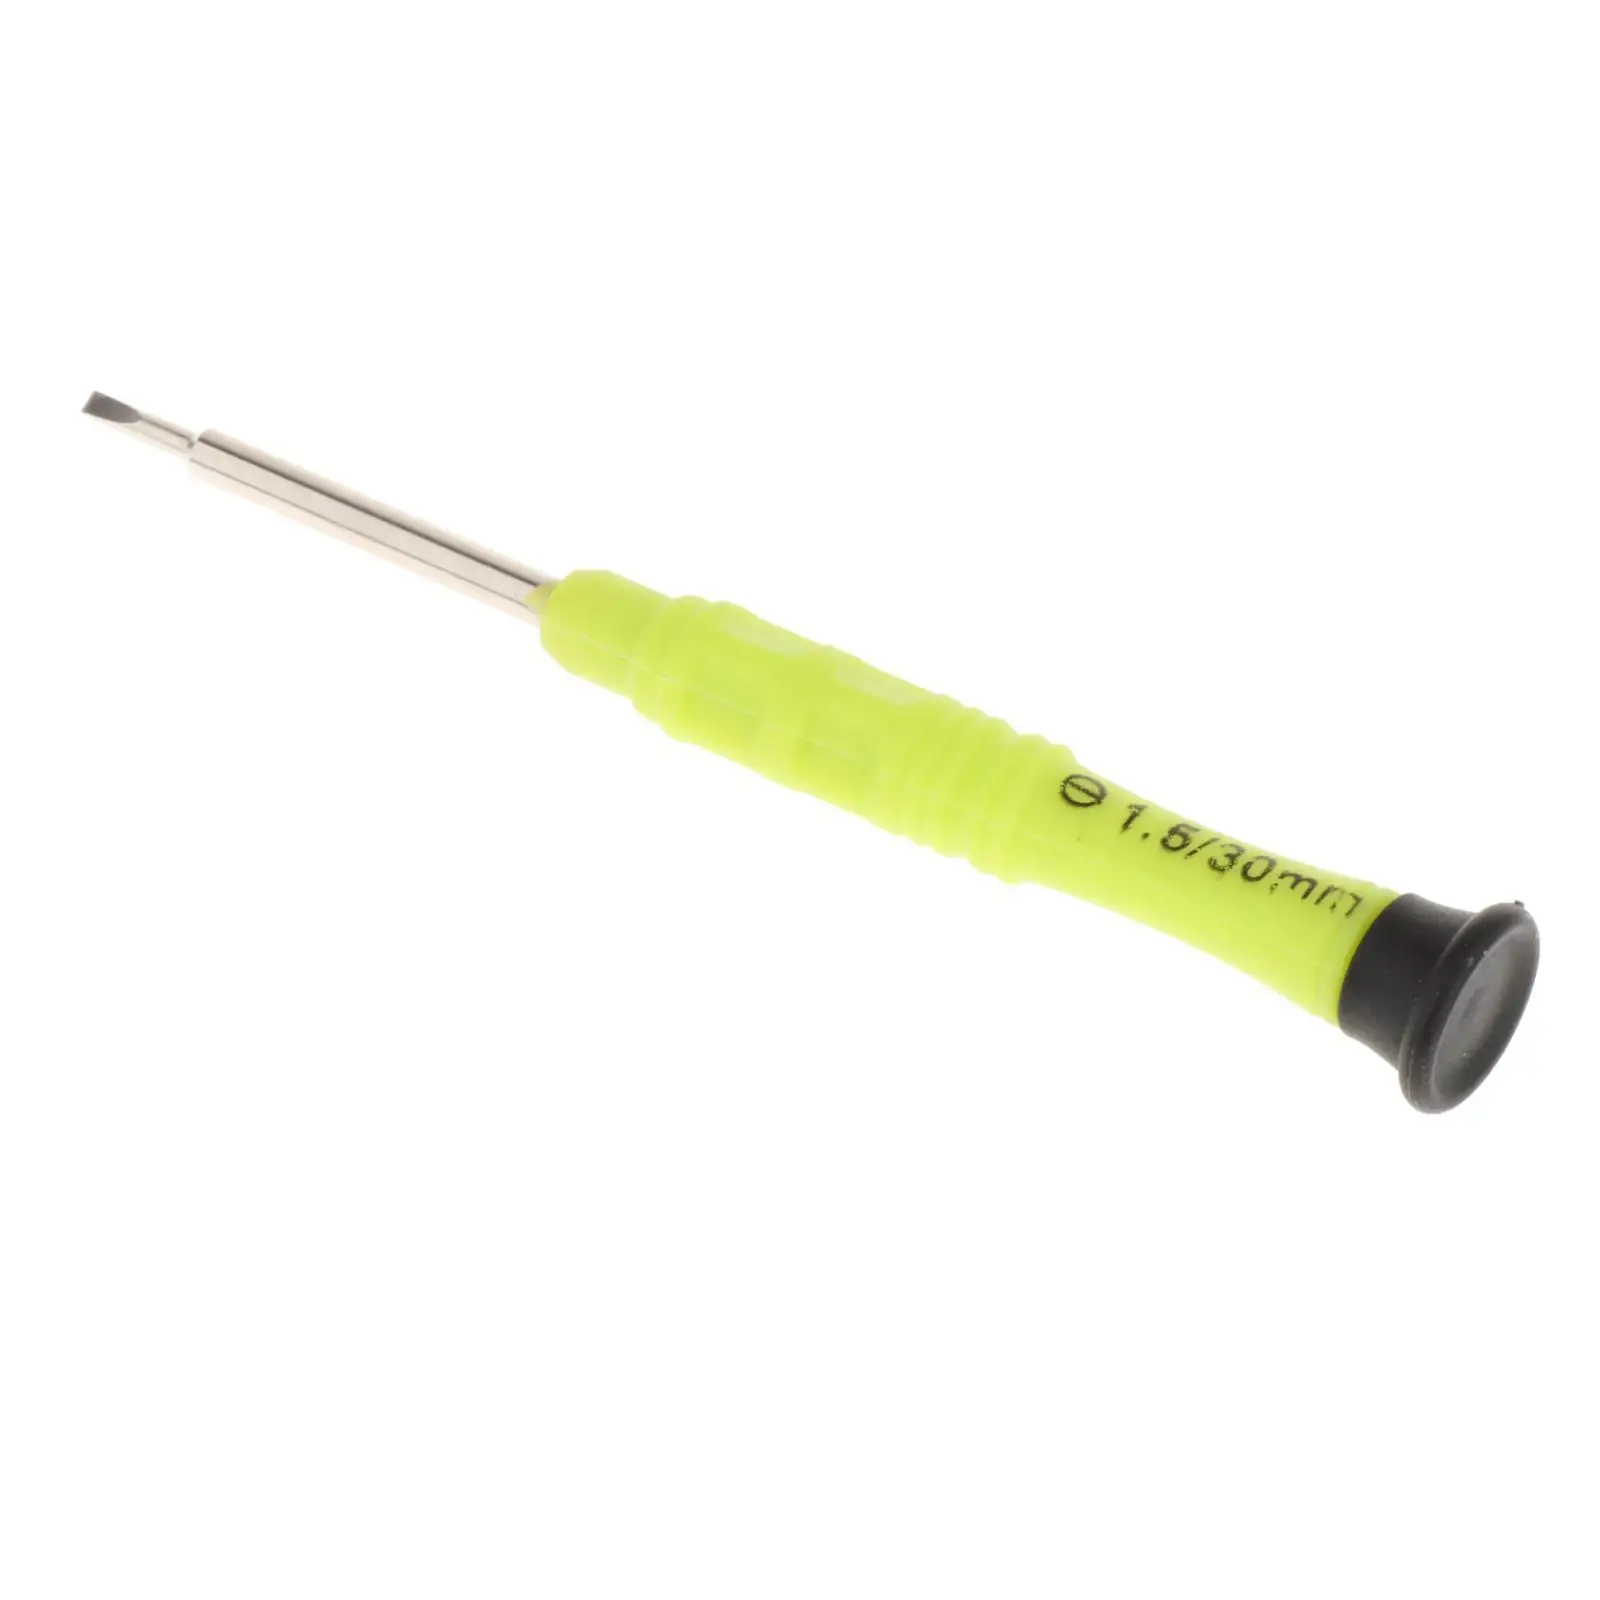 Fencing Screwdriver Repair Tool Simple to Use for Fencing Competitions Accessories